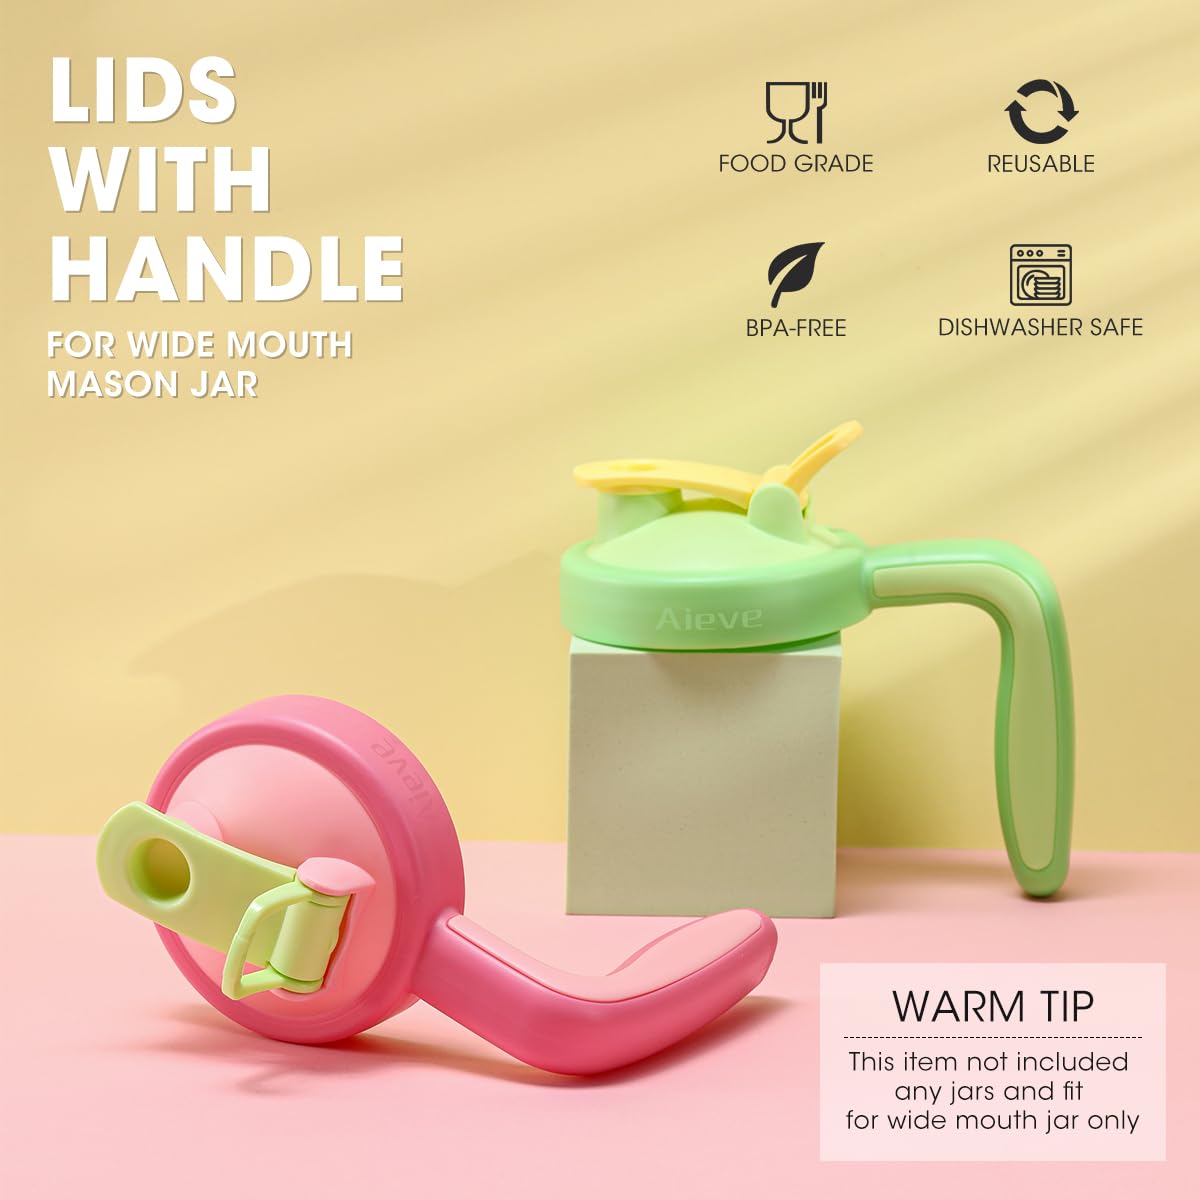 lids with handle for wide mouth manson jar